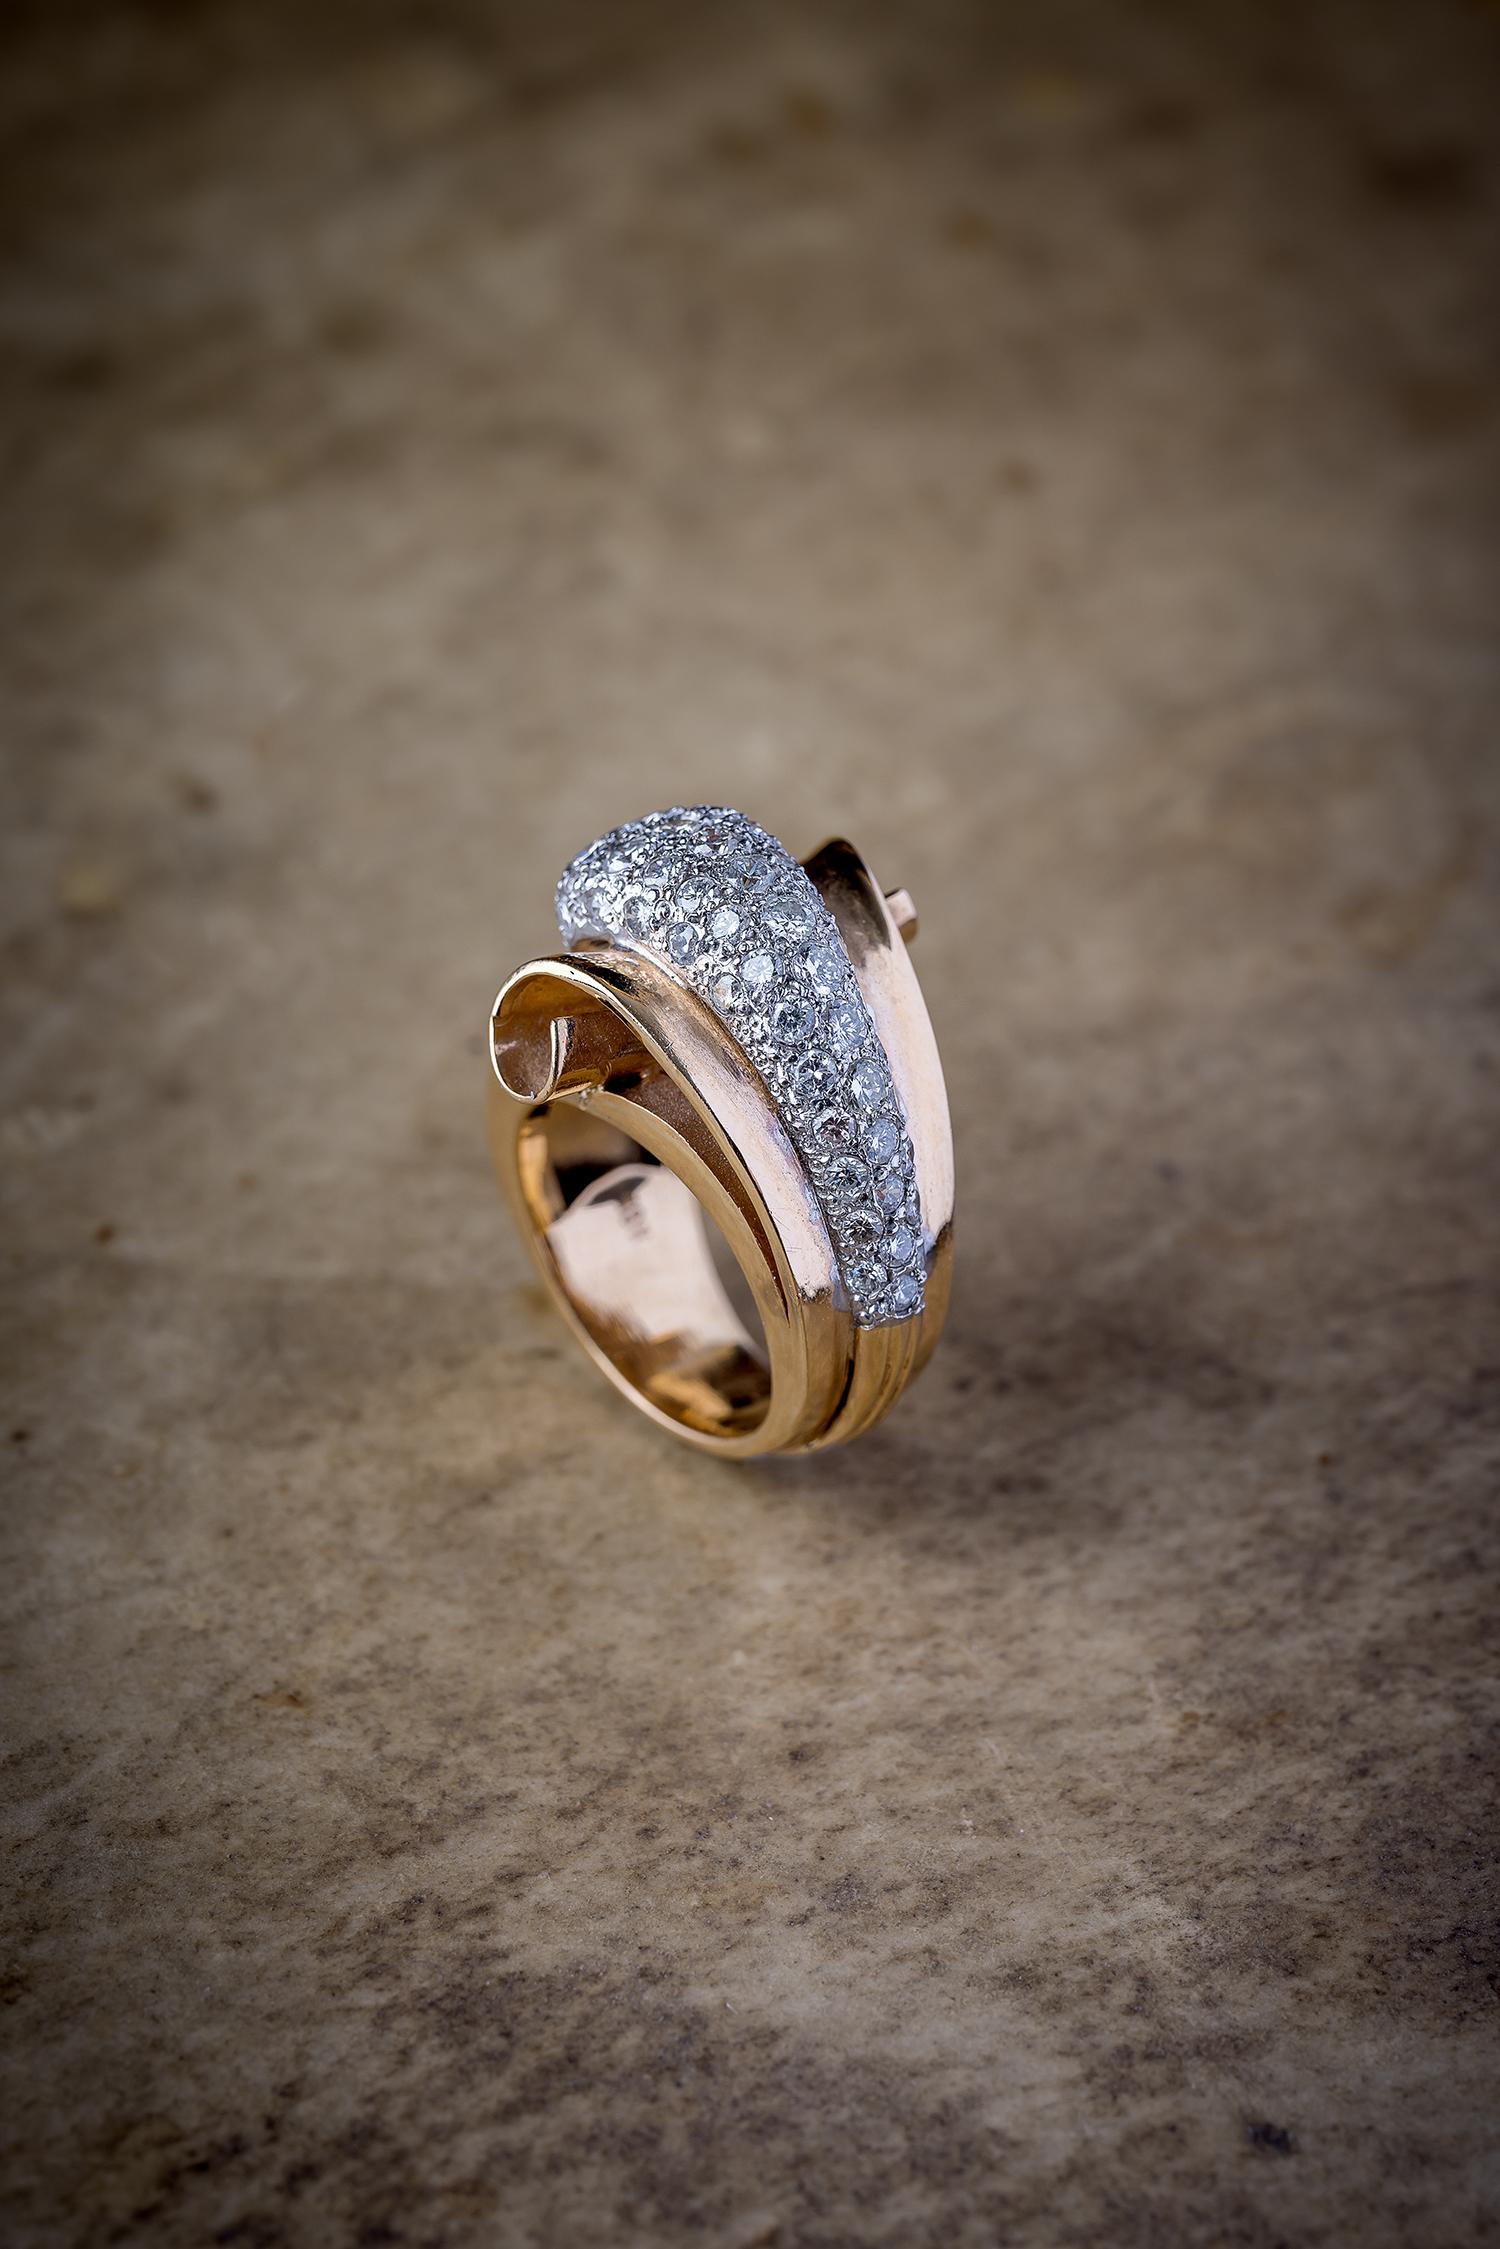 A great example of a swirling 1940s ring, 

Made in 18 karat yellow gold, with platinum sights. 
Center set with 45 brilliant-cut, grain-set diamonds approx 1.7ctw in total. 

8.4 gram Size 6. 
20mm wide, 11mm high